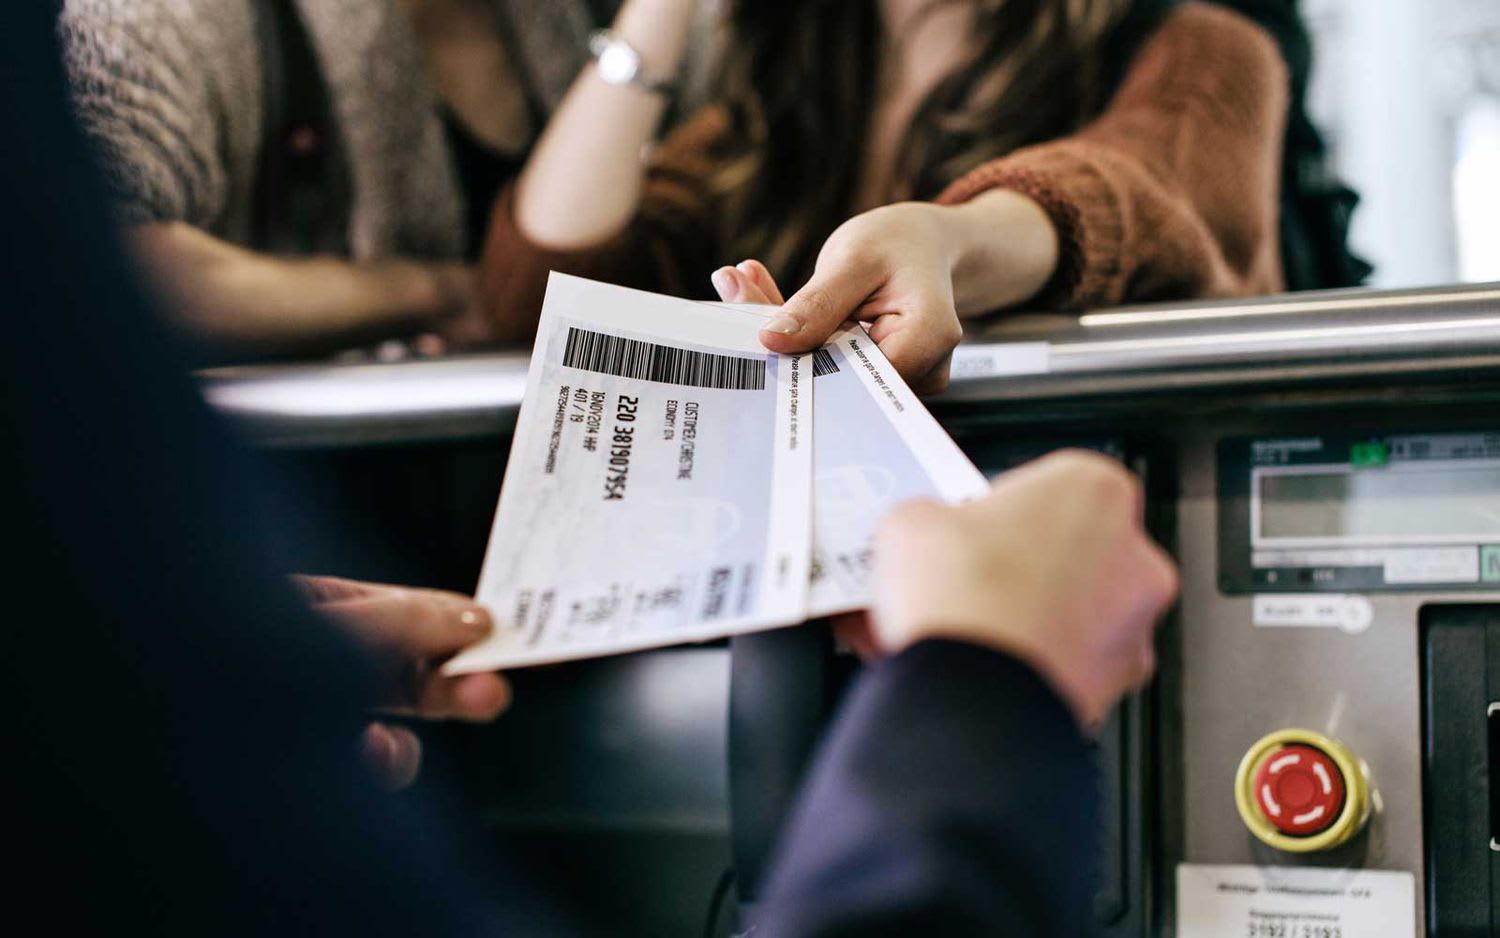 The Most Important Thing to Check When Booking a Flight